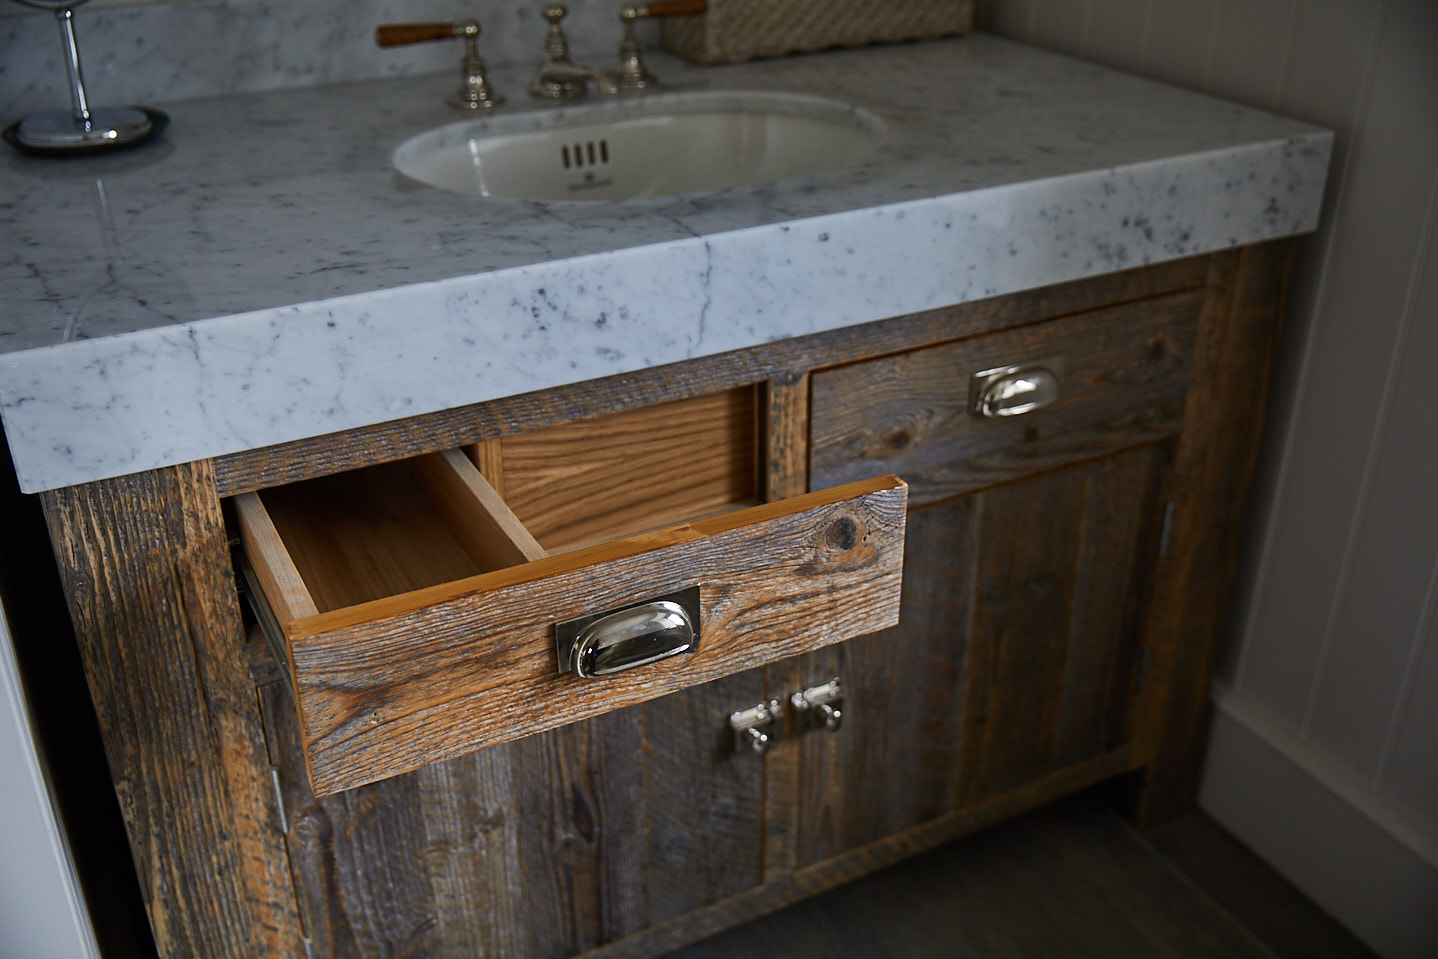 Rustic vanity drawer is shaped around pipes